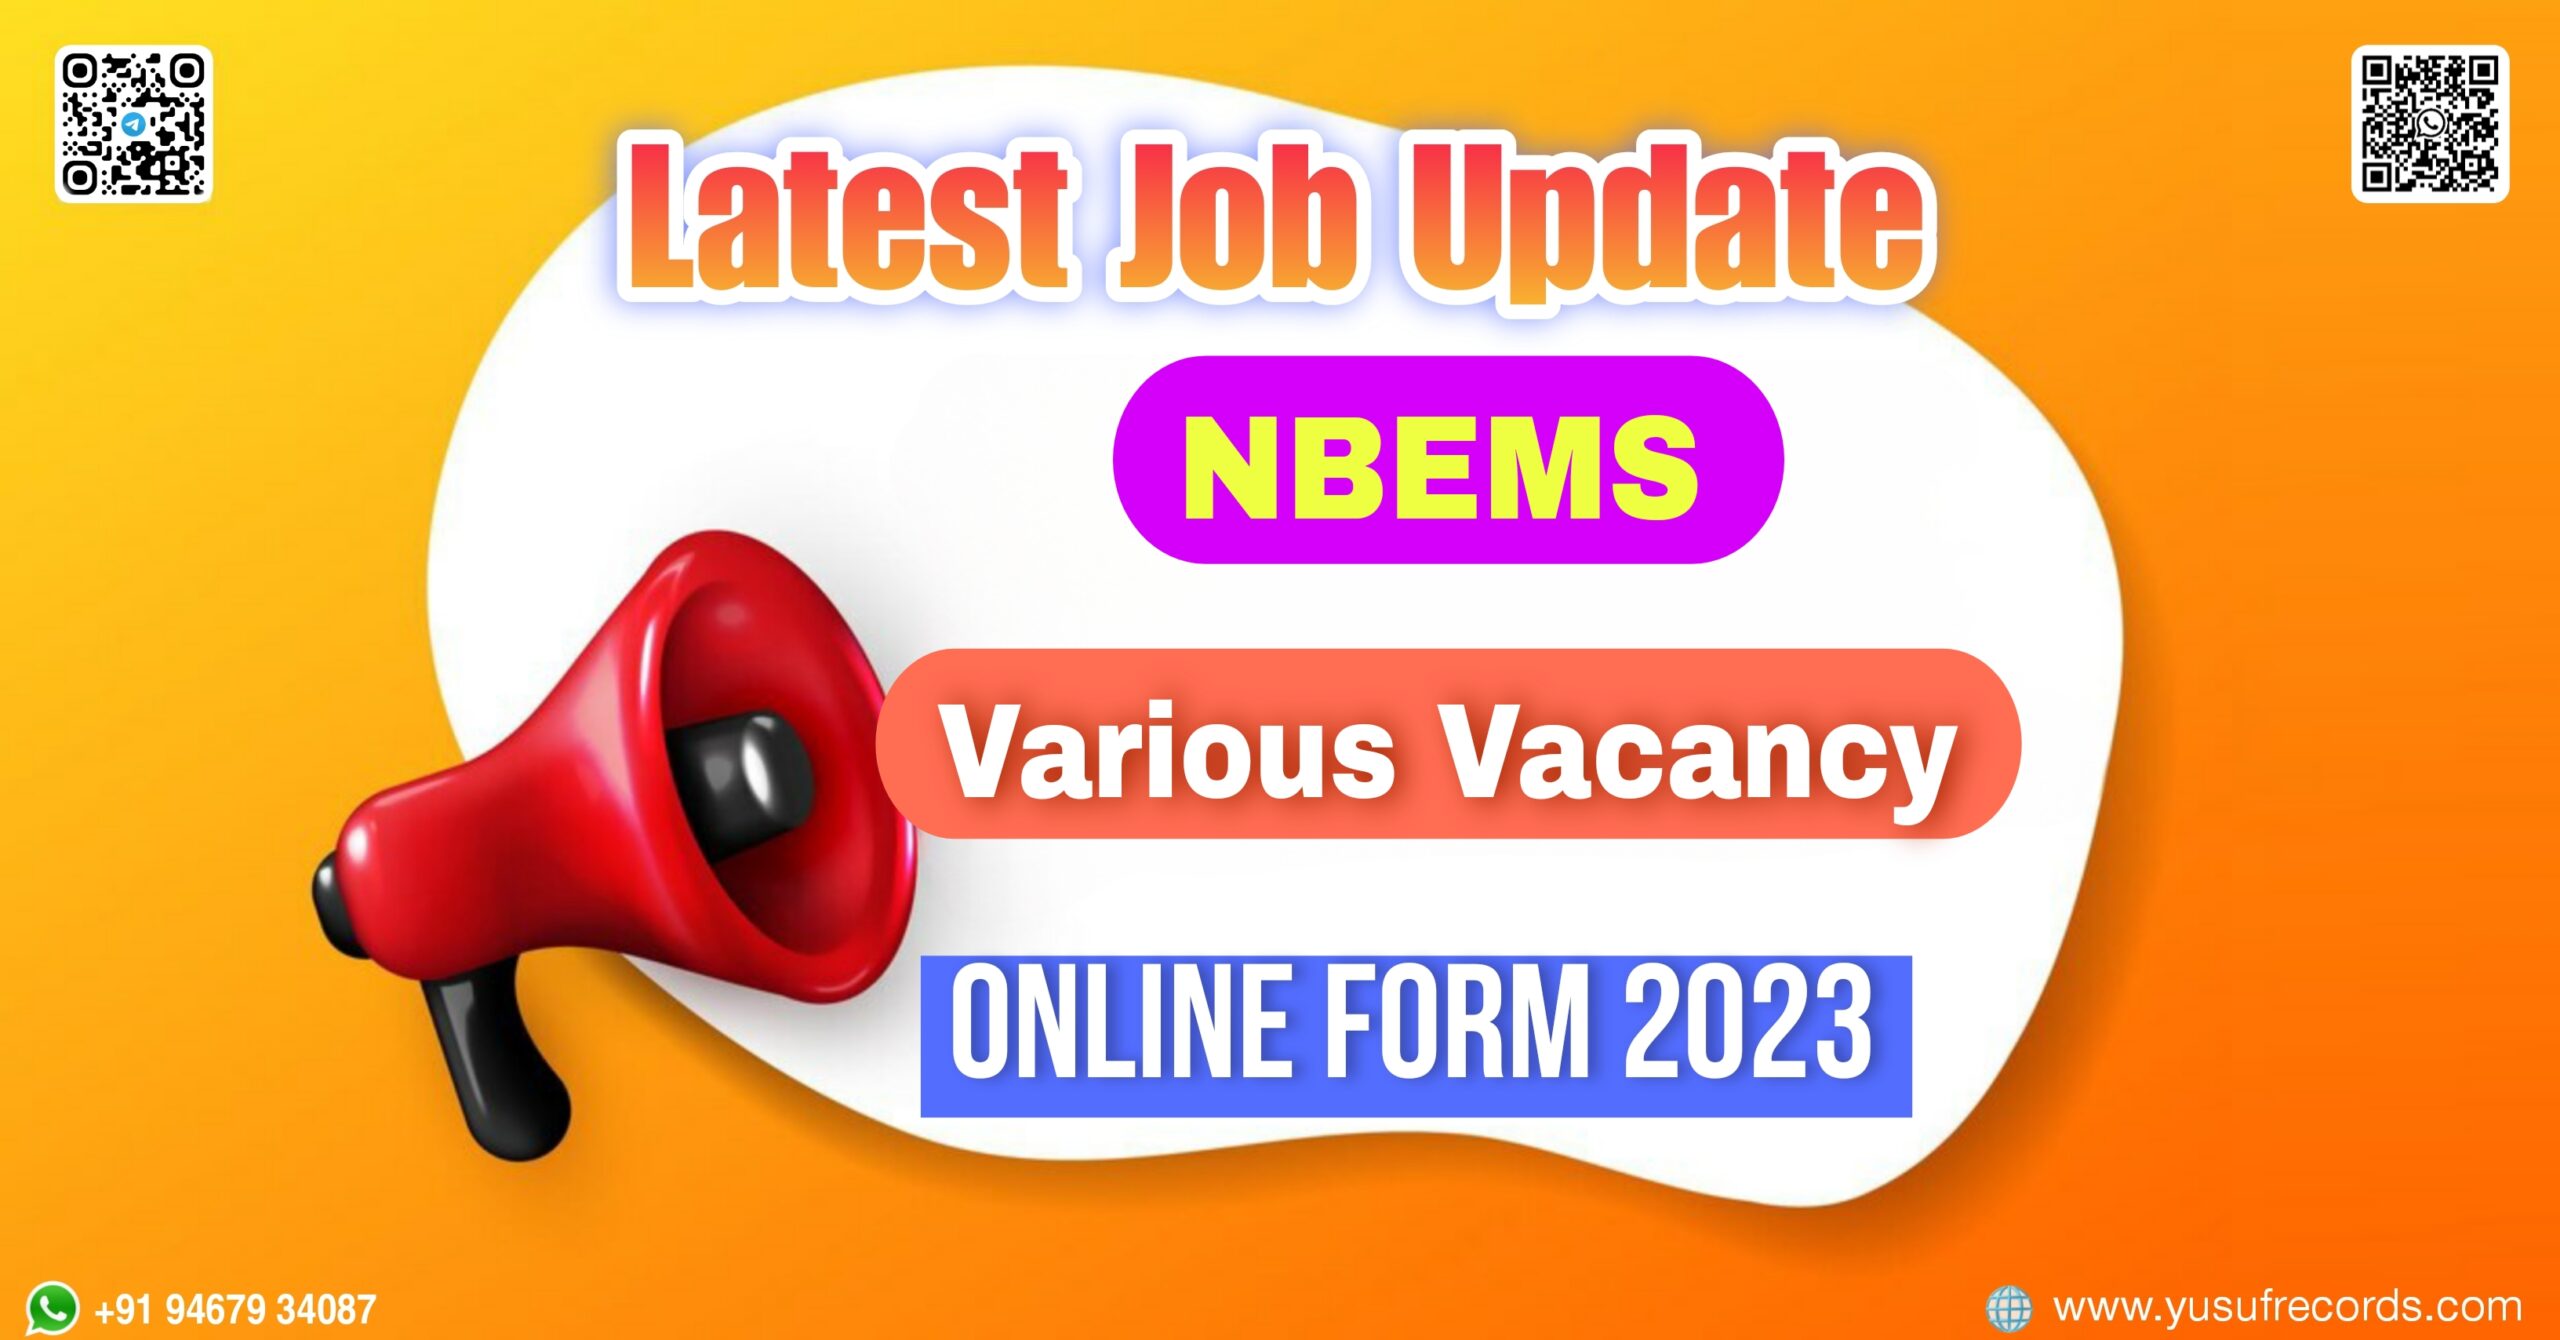 NBEMS Various Vacancy Online Form 2023 yusufrecords